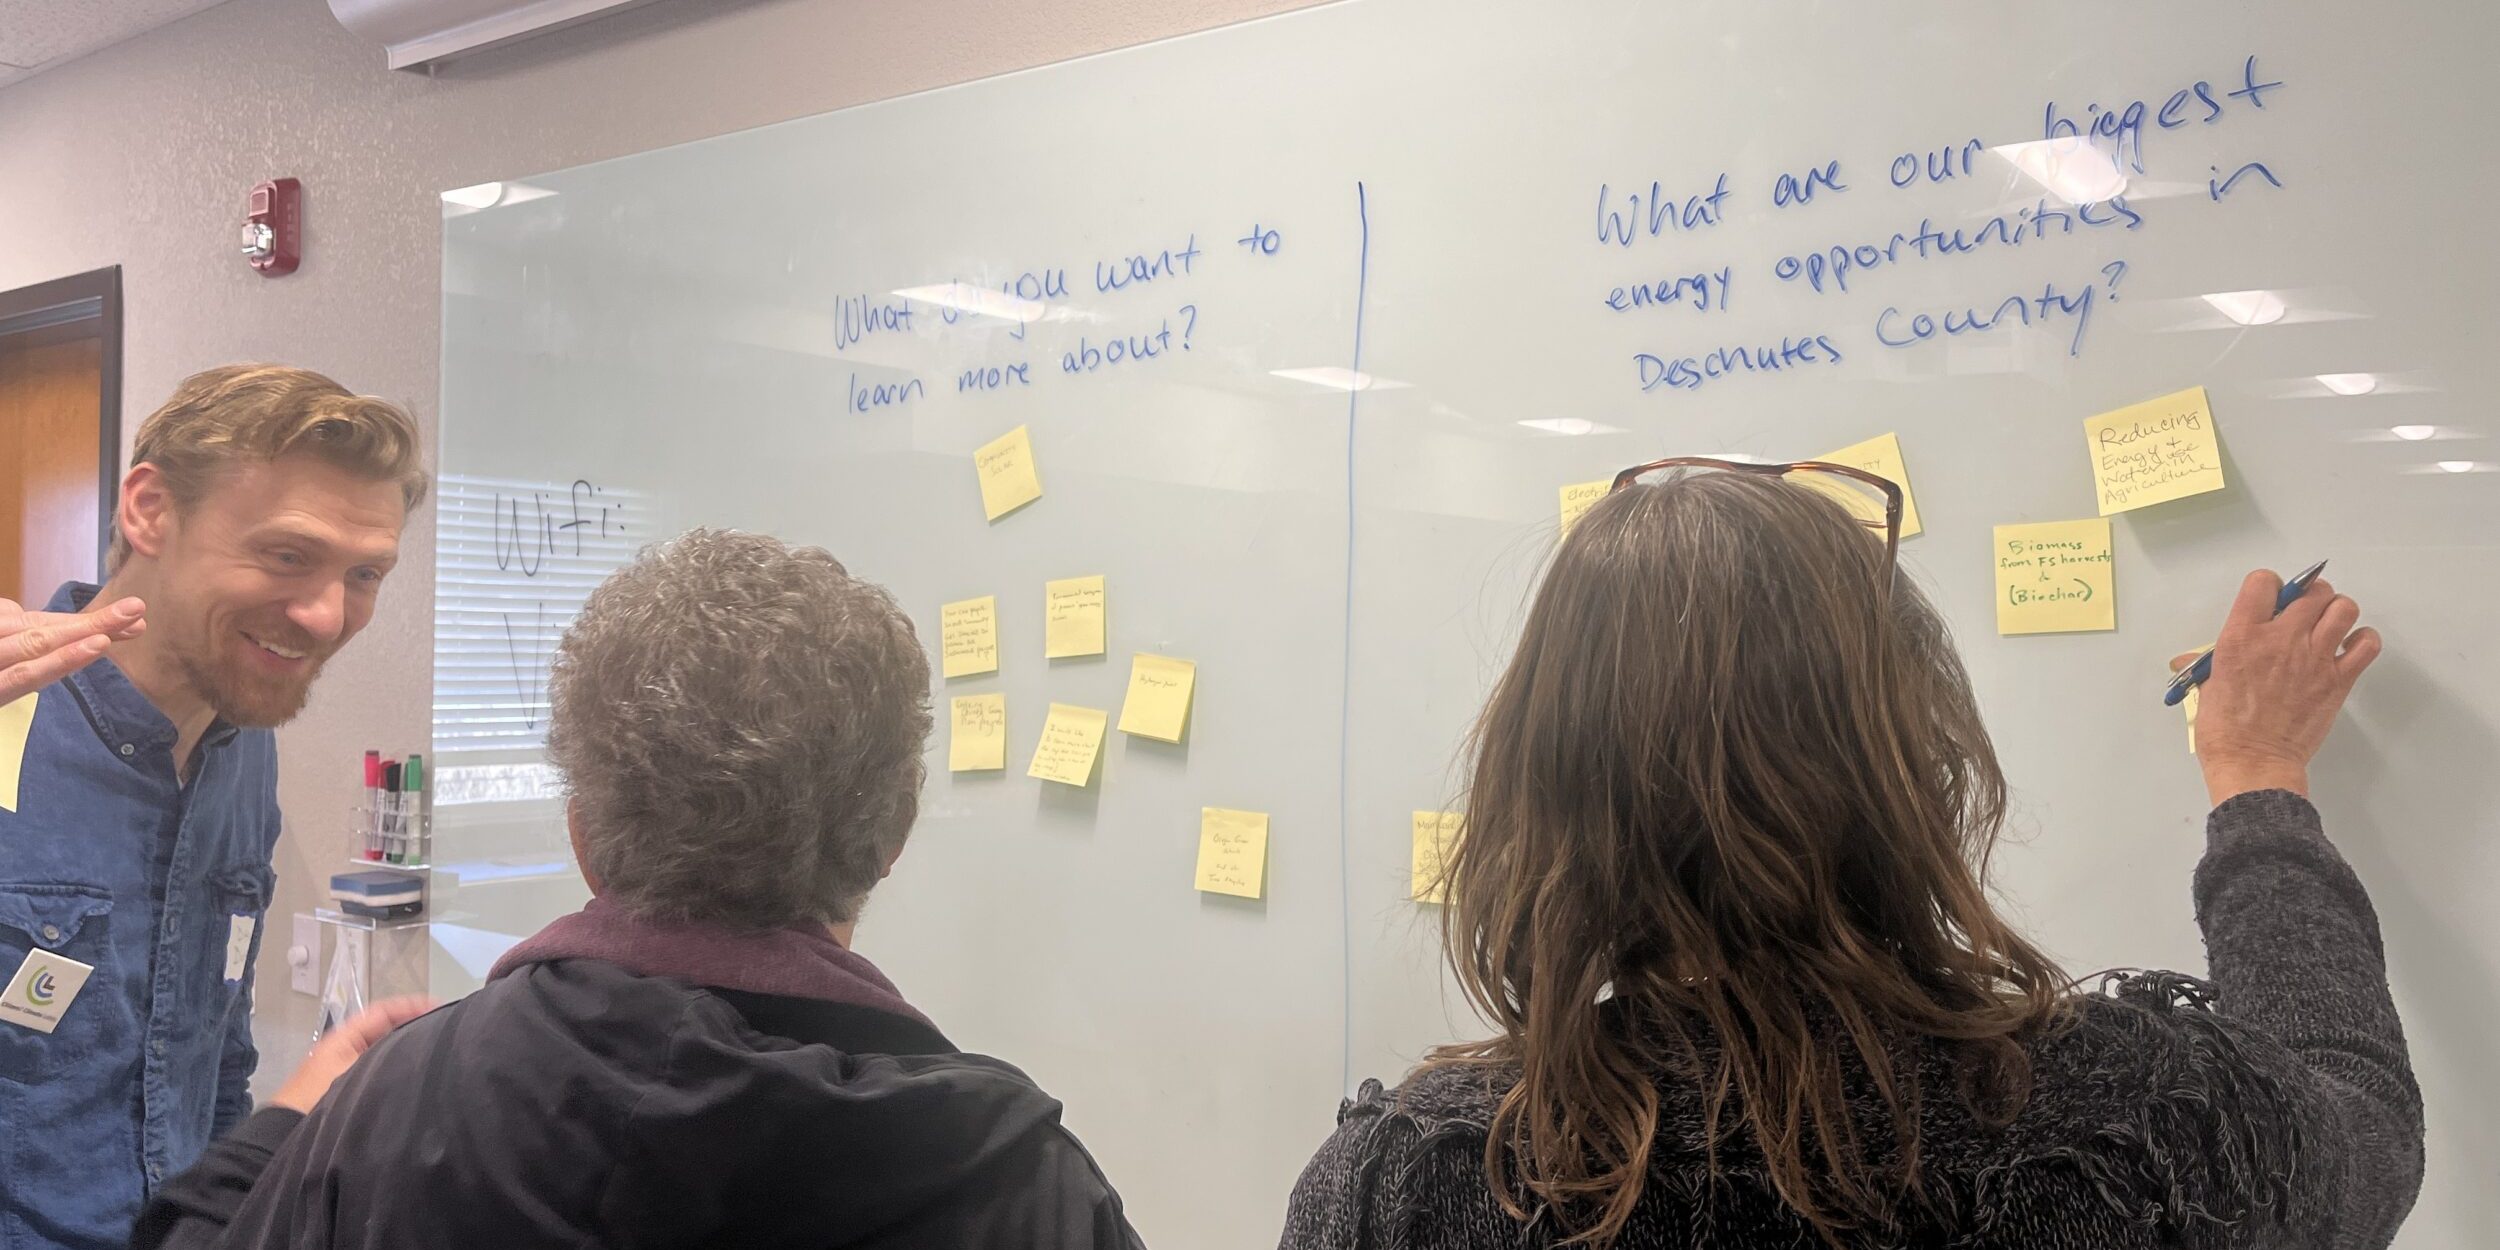 Three people gathered around a whiteboard, talking and putting yellow sticky notes in categories